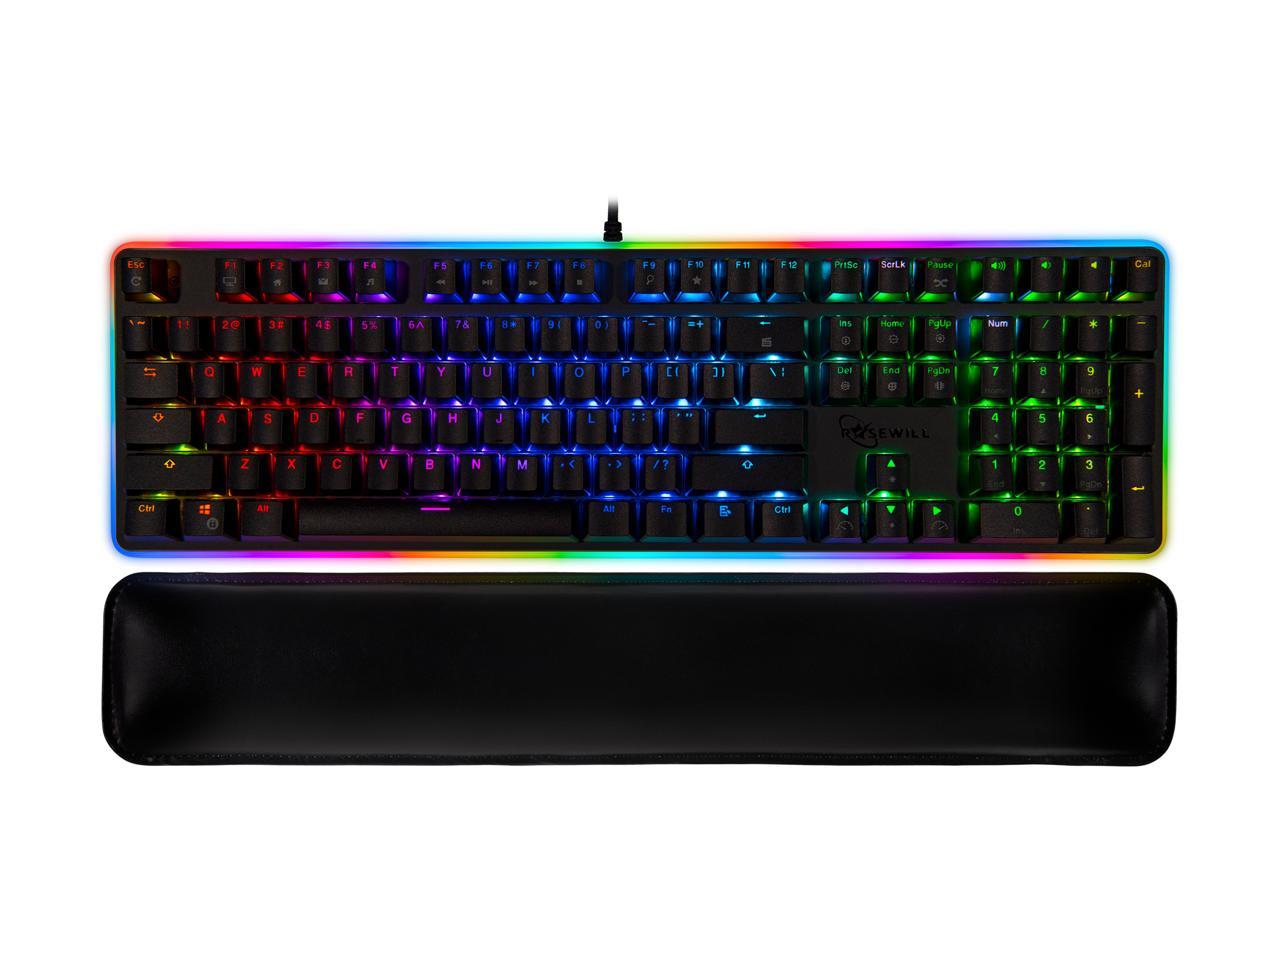 Rosewill NEON K81 RGB BR Wired Mechanical Gaming Keyboard $35 + Free Shipping